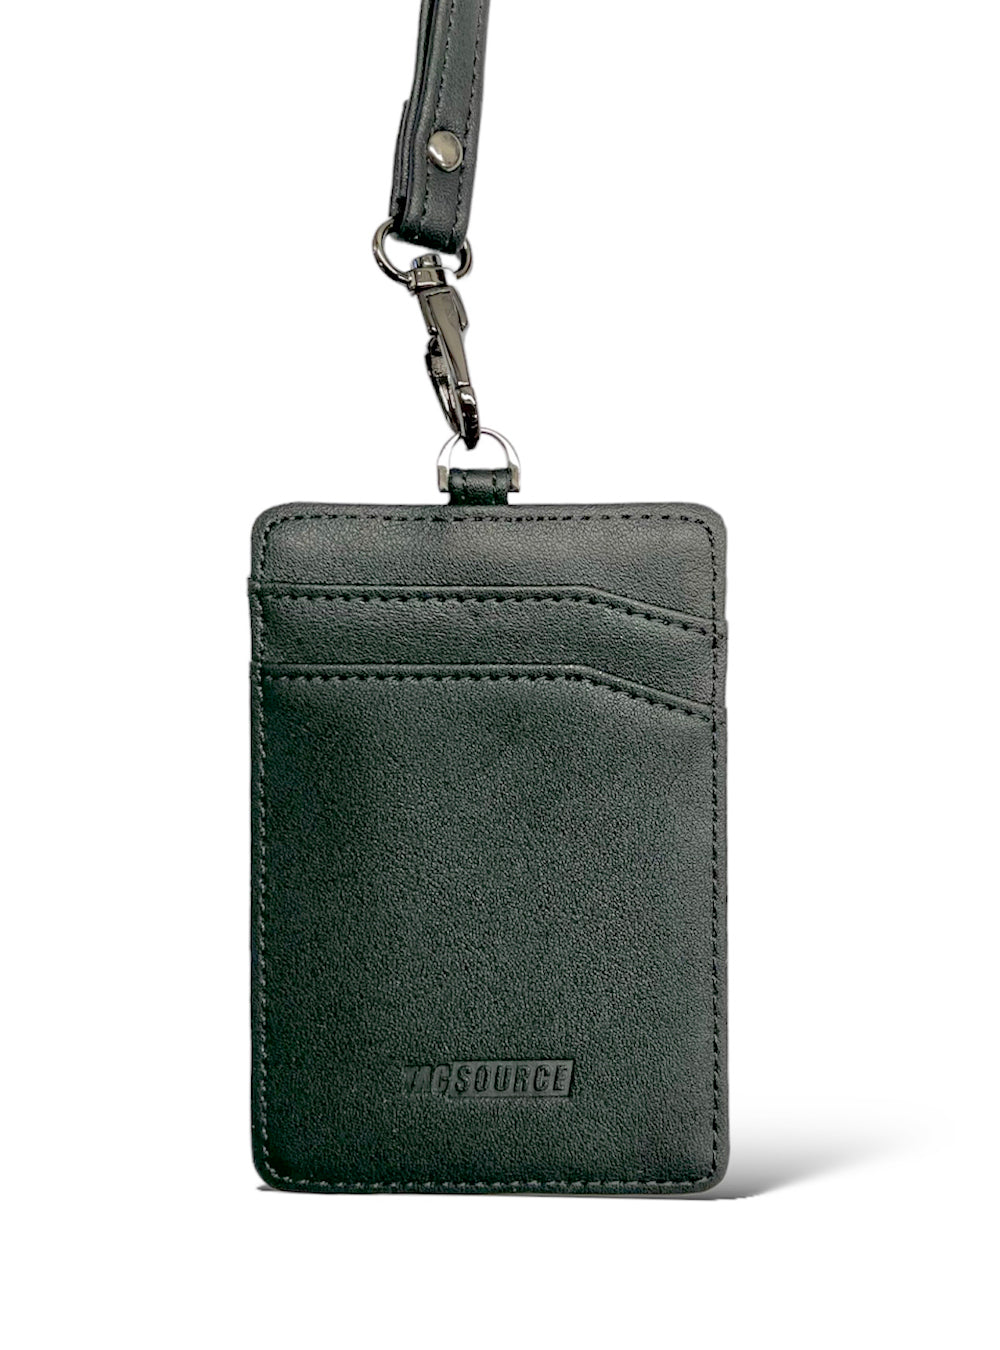 TacSource Recycled Leather ID Holder